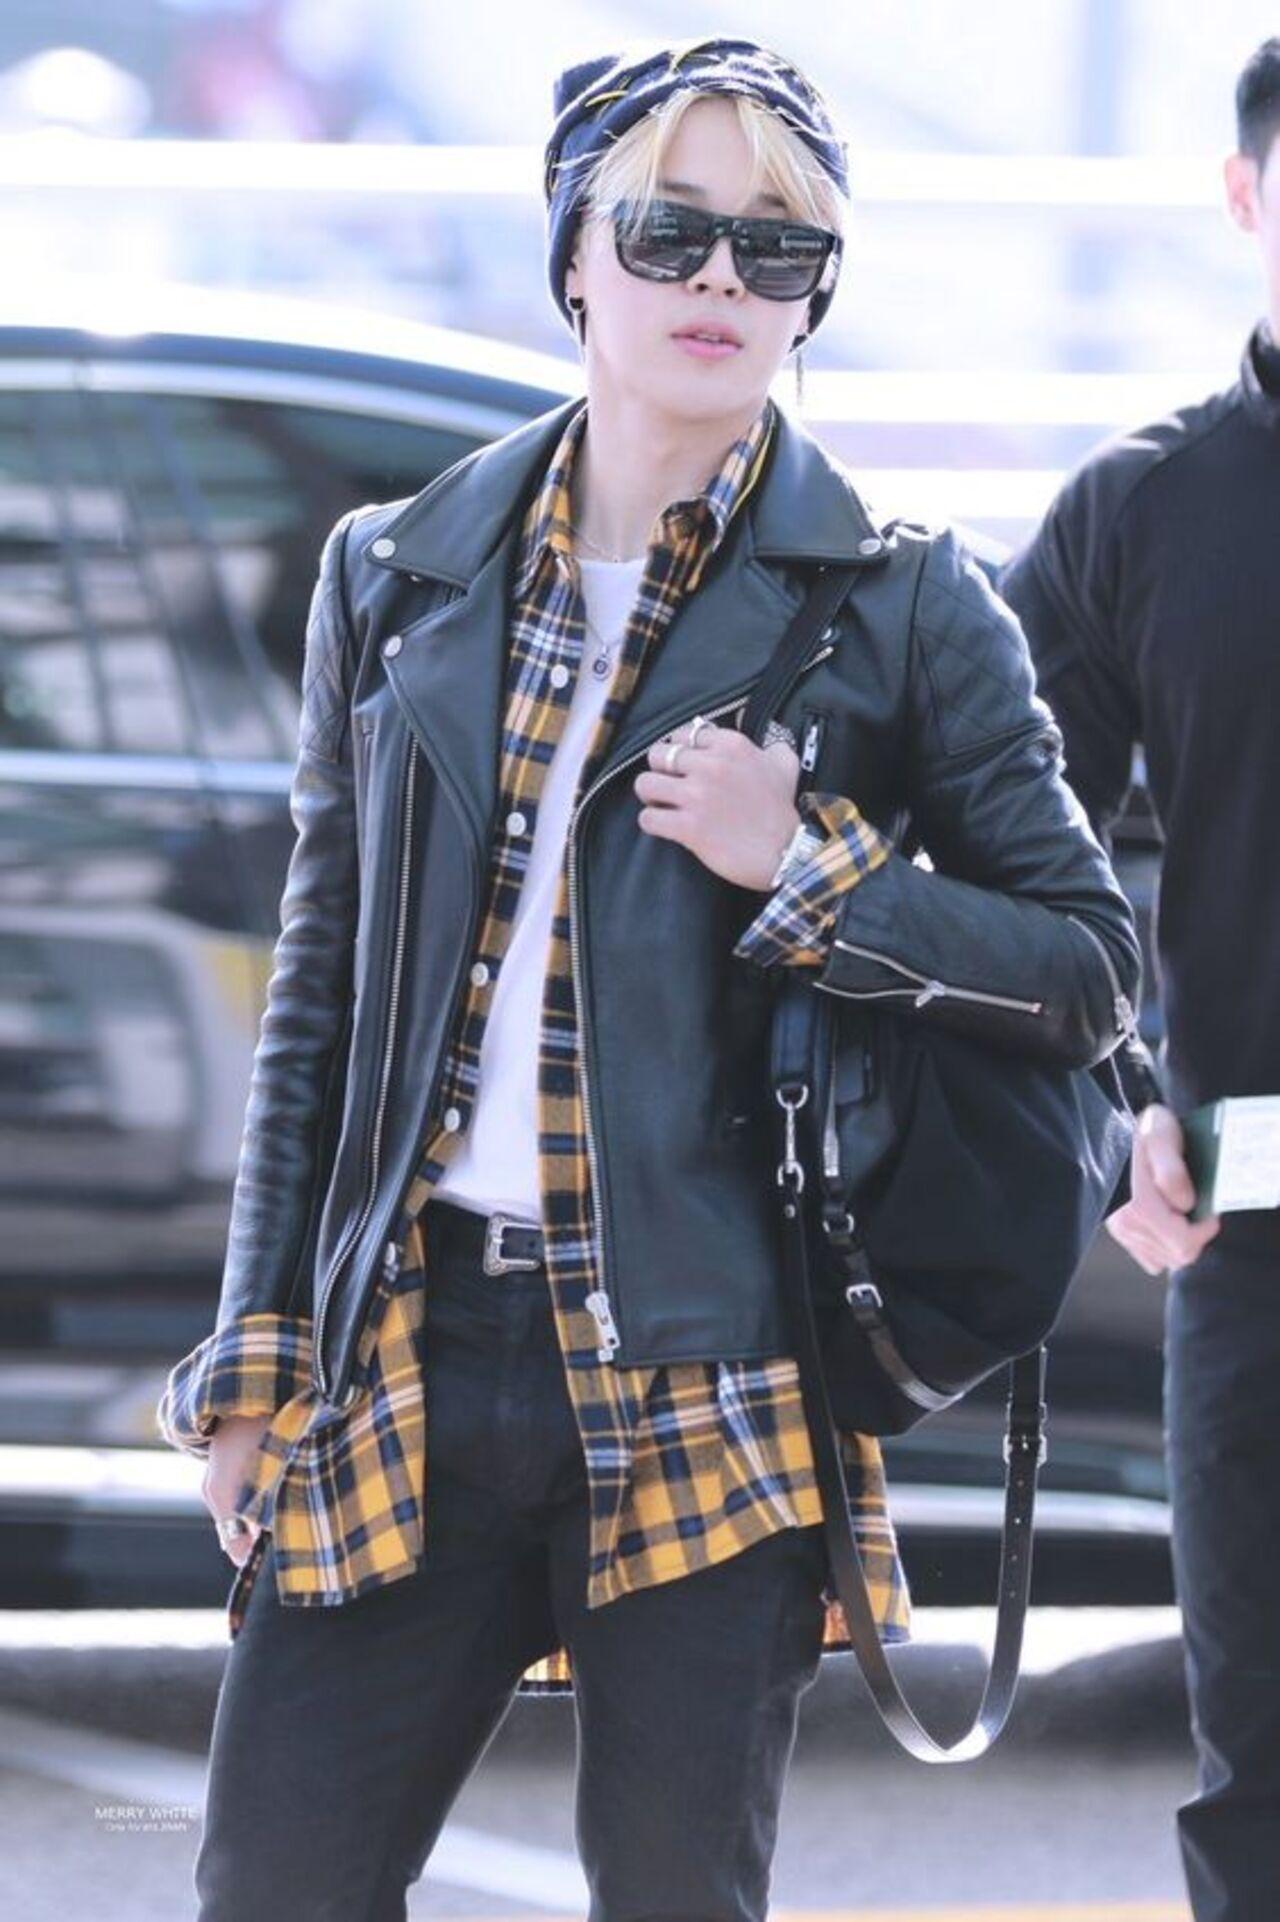 BTS Park Jimin - His hair color in his Airport Fashion